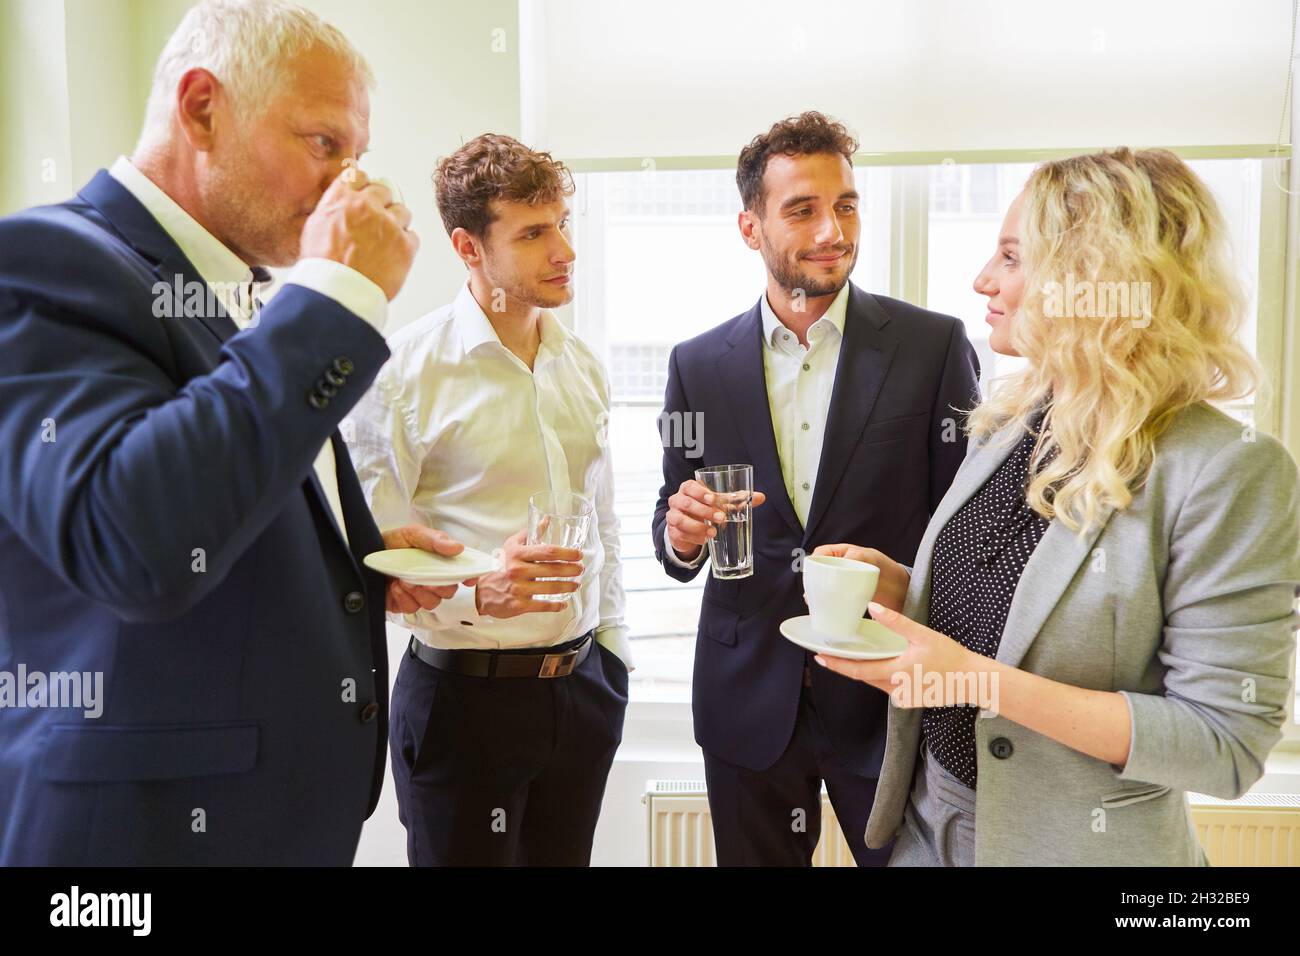 Group of business people on a coffee break having casual small talk Stock Photo